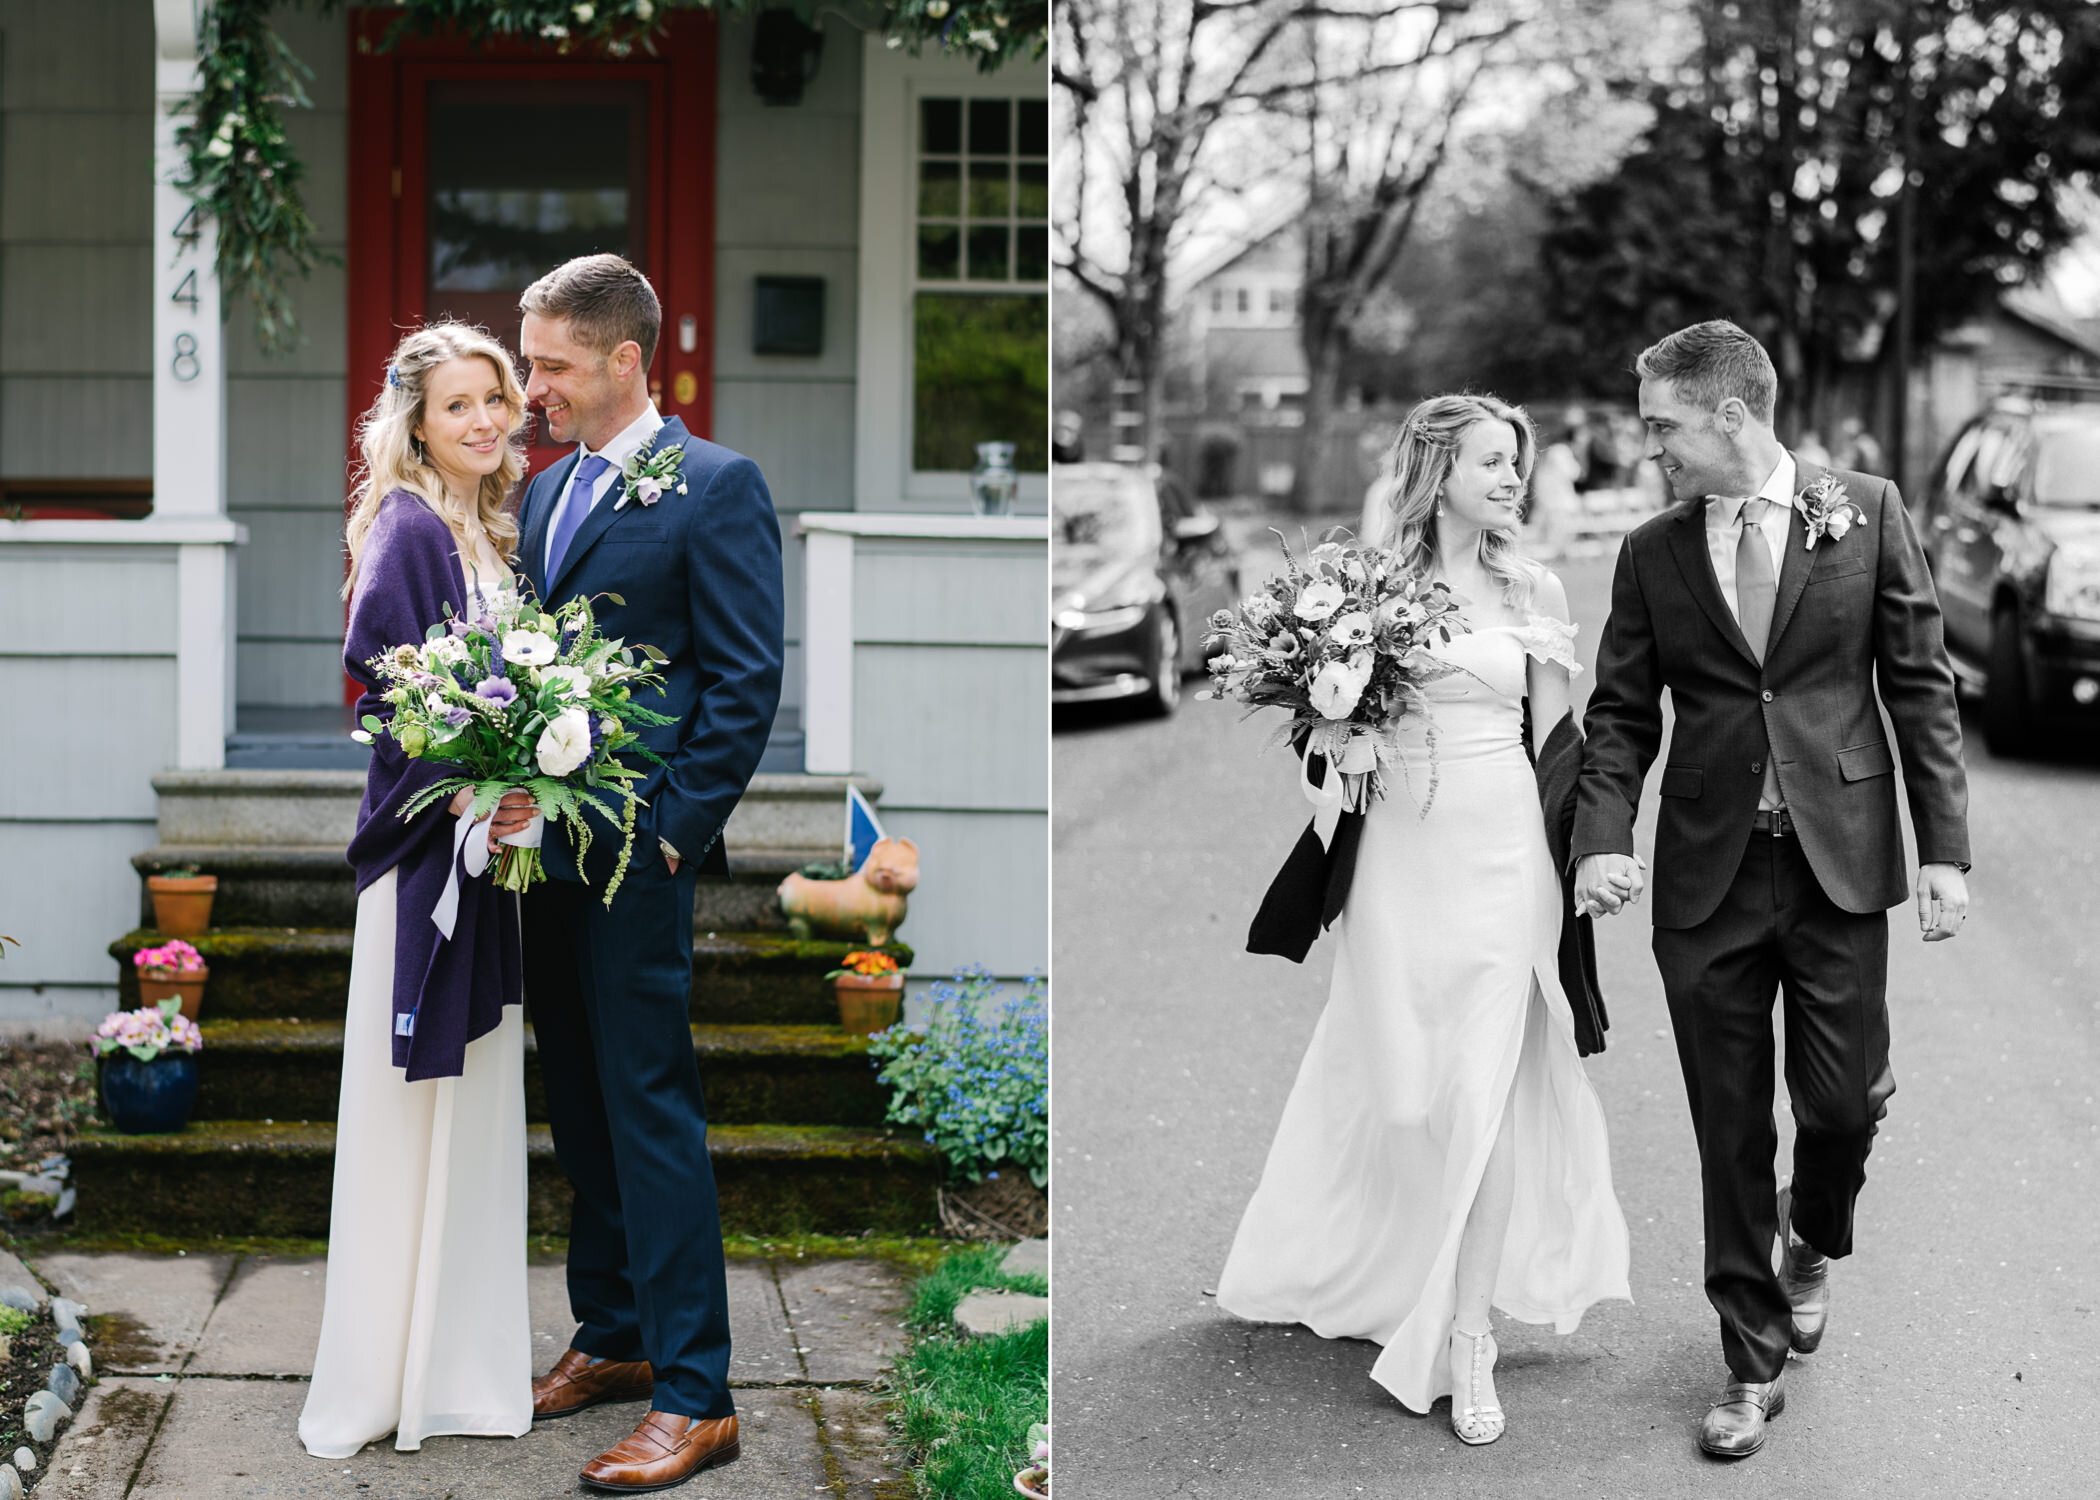  Bride with purple shawl, purple and white bouquet, stand with groom in blue suit during candid wedding portrait 